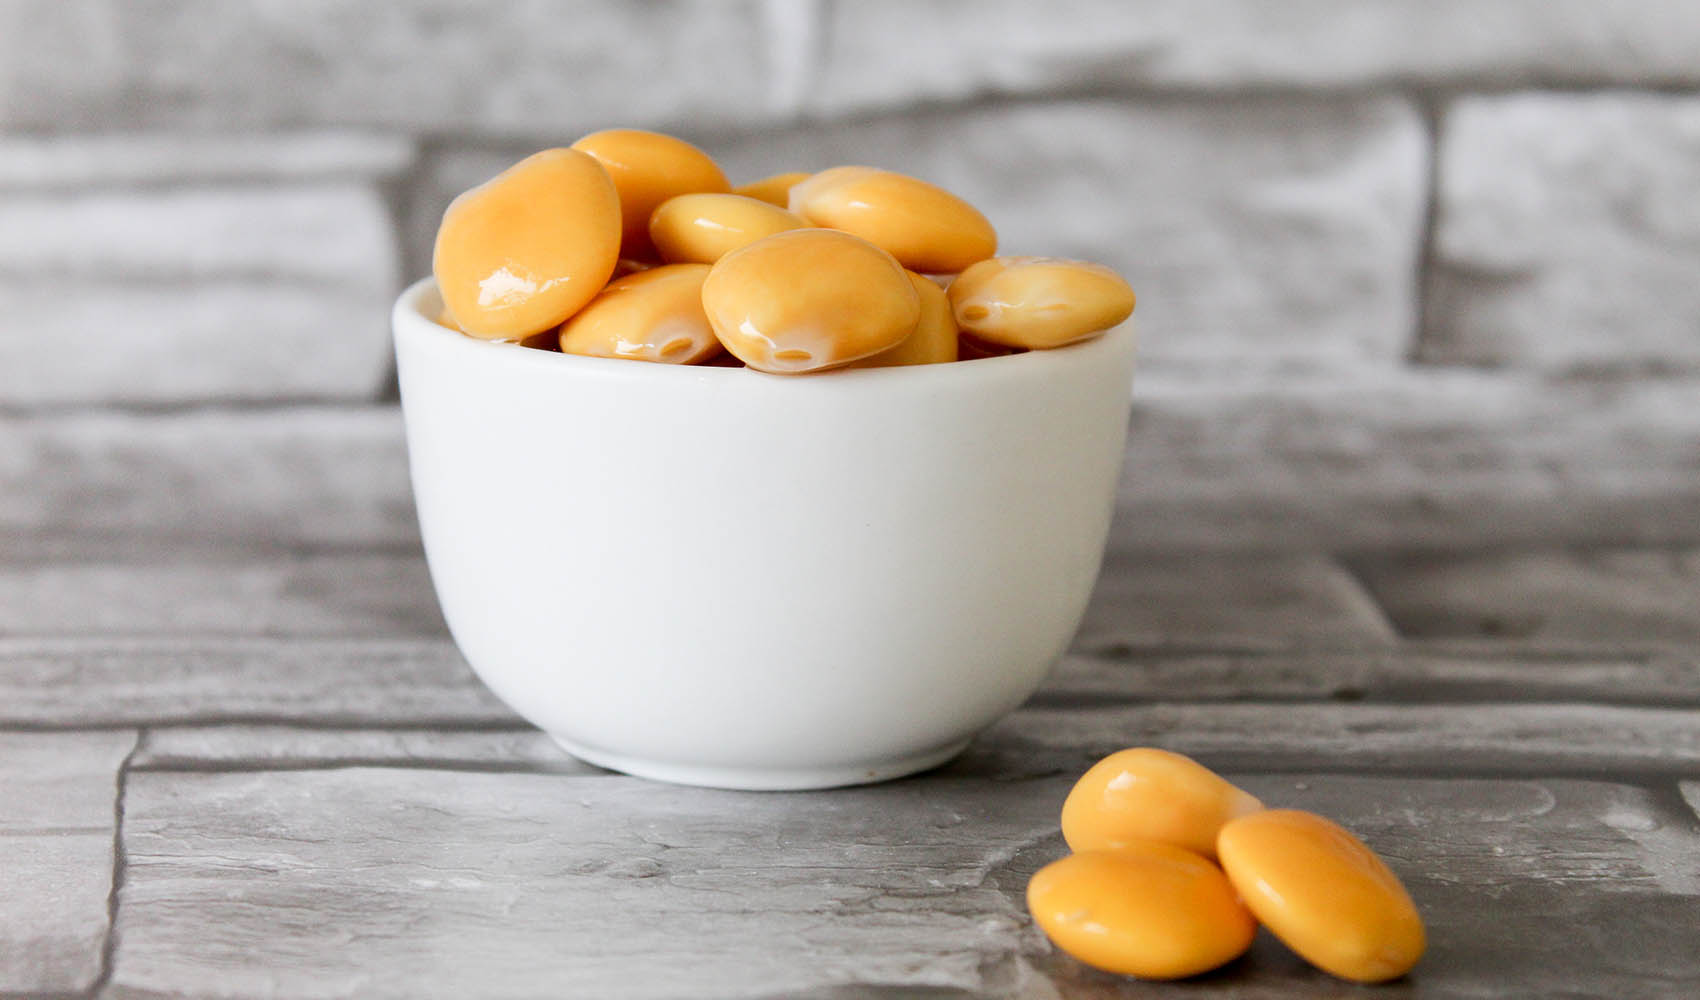 Lupini-Beans-the-Health-Benefits-and-Ways-of-Consuming-Them-2